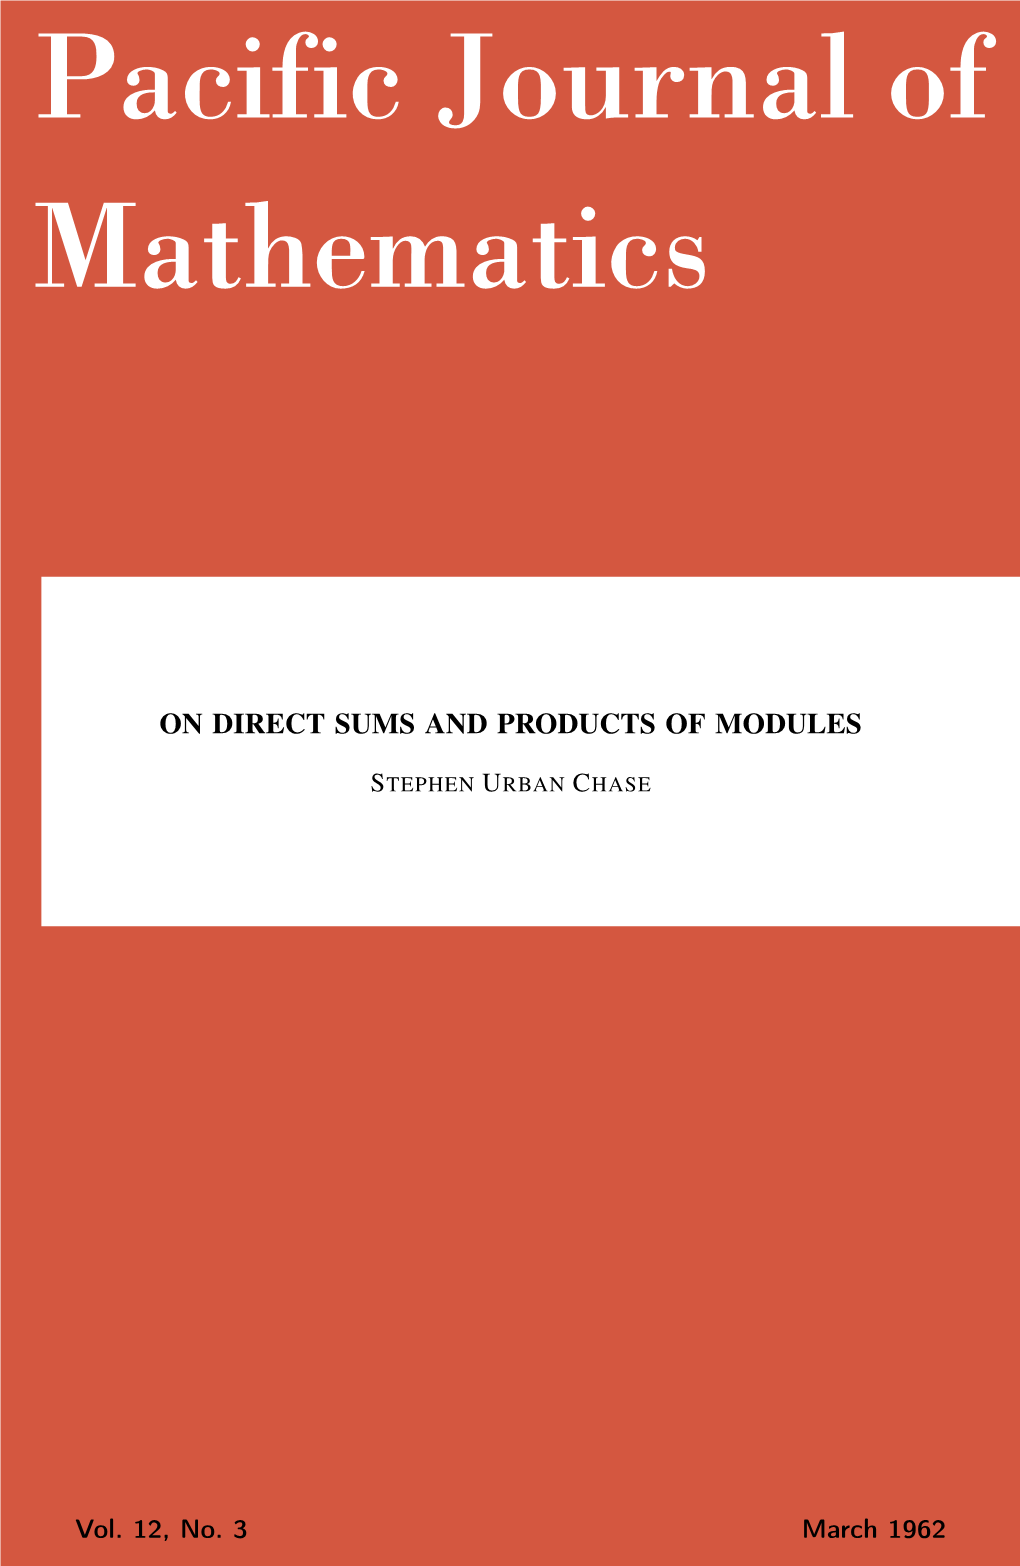 On Direct Sums and Products of Modules